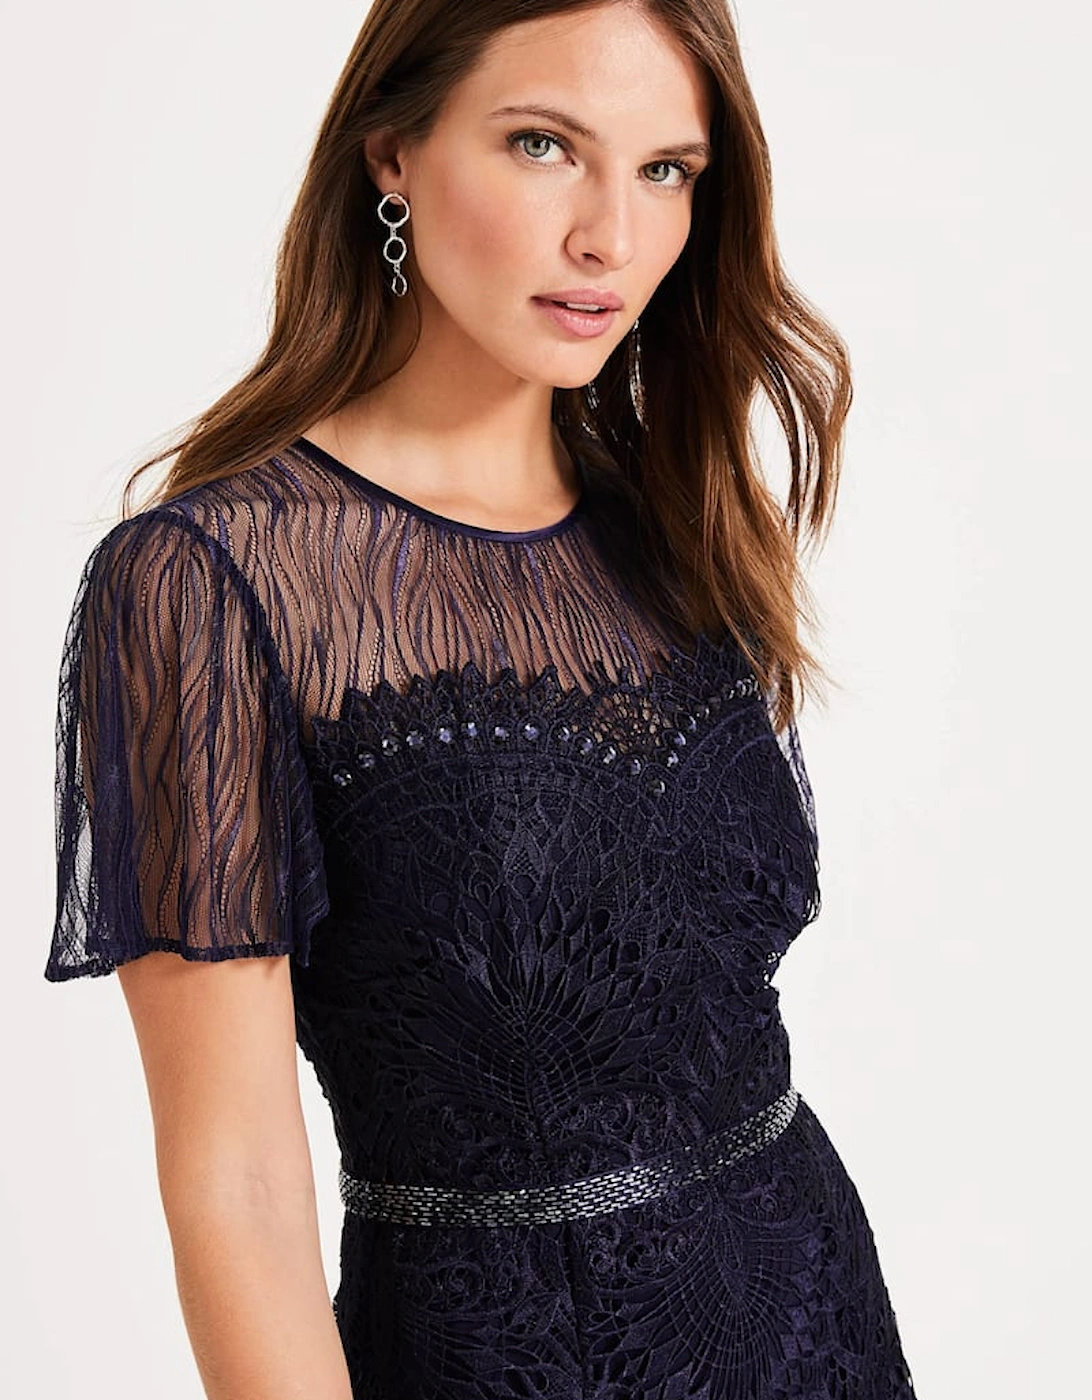 Cayleigh Lace Maxi Dress